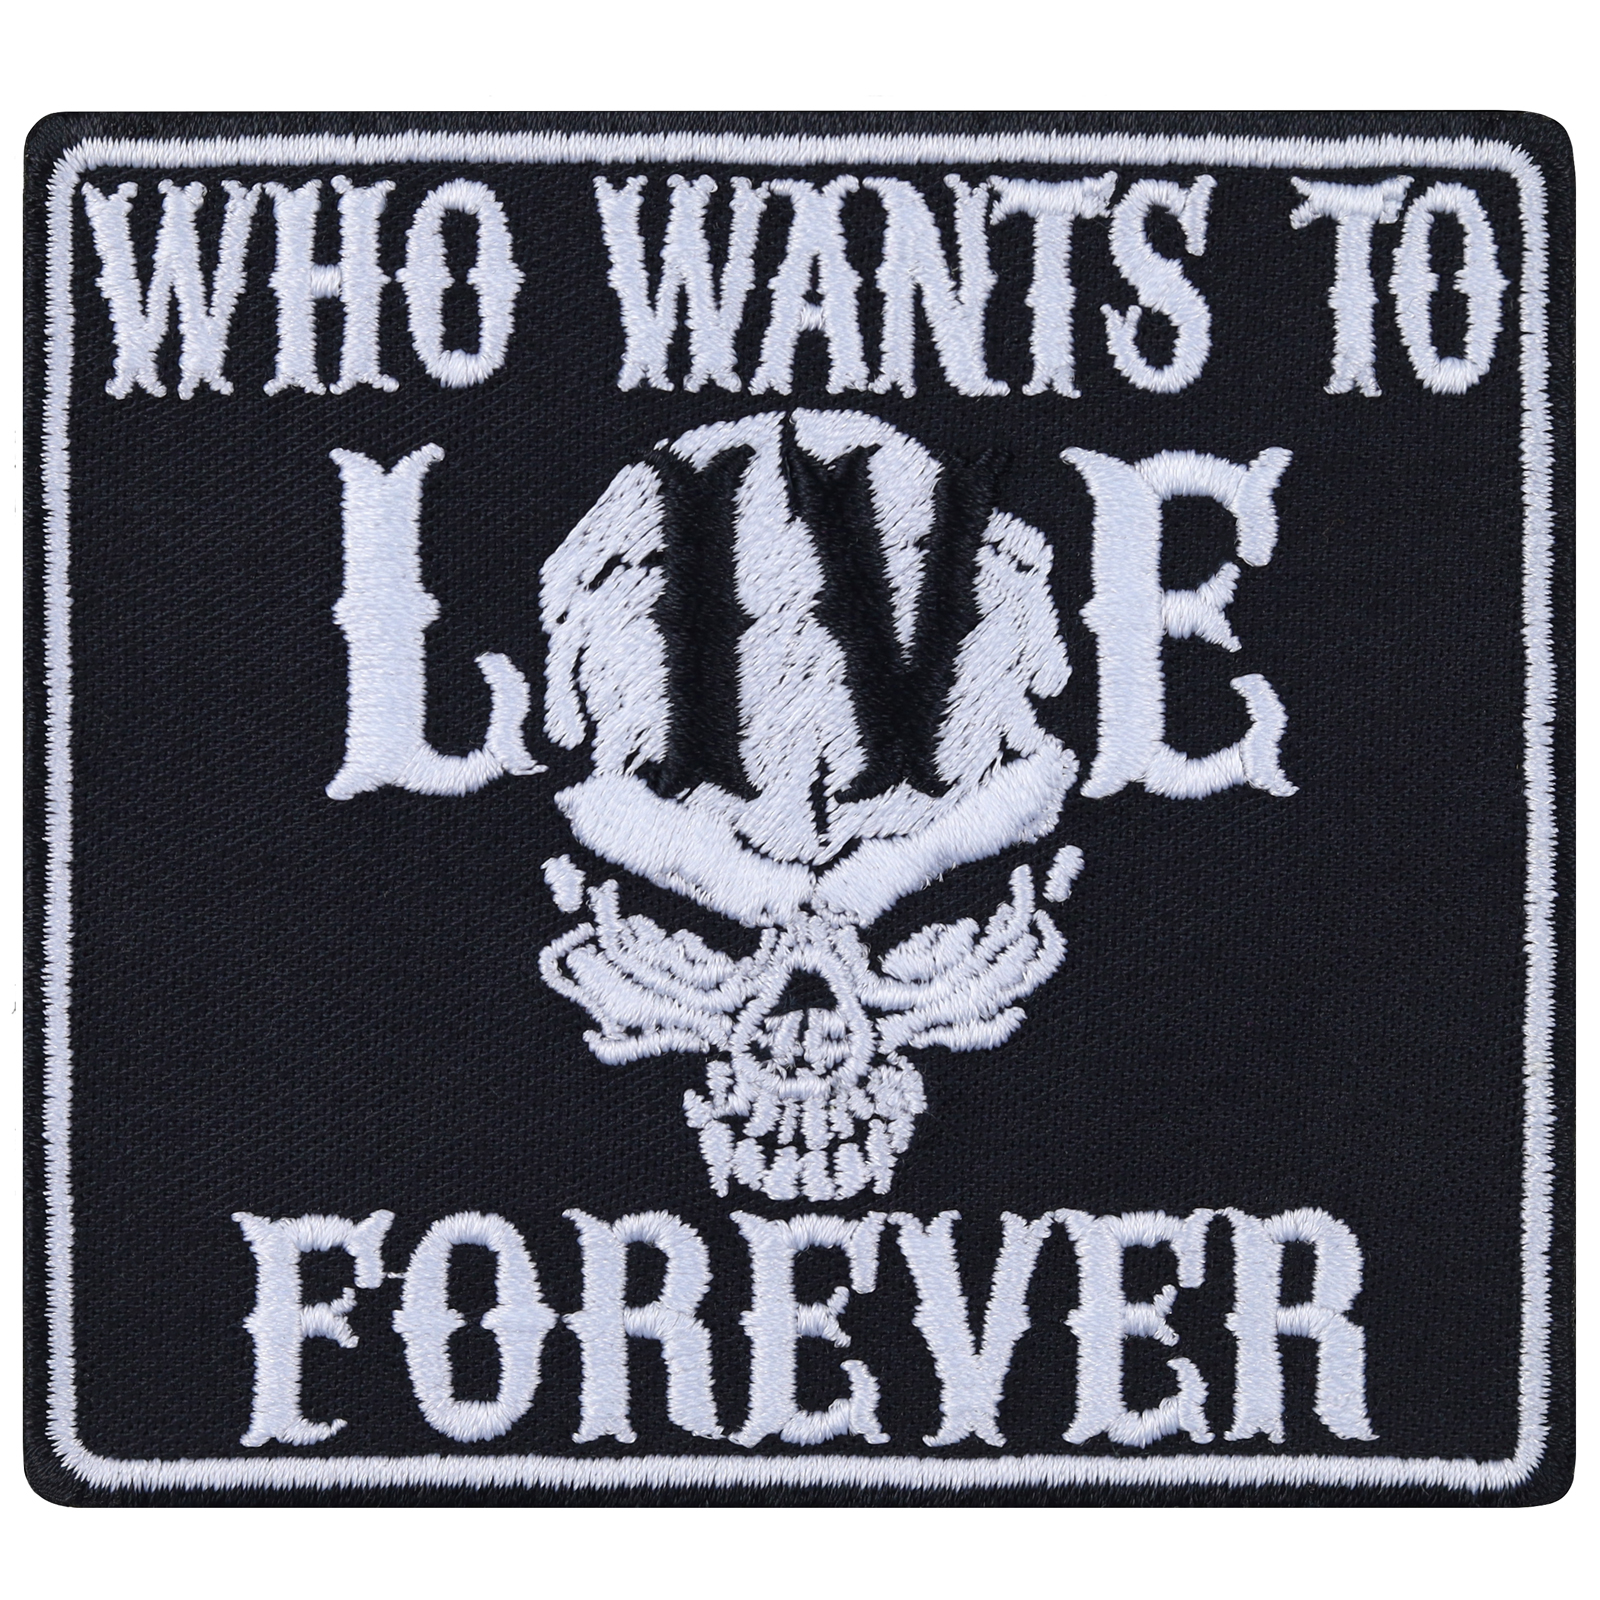 Who wants to live forever - Patch